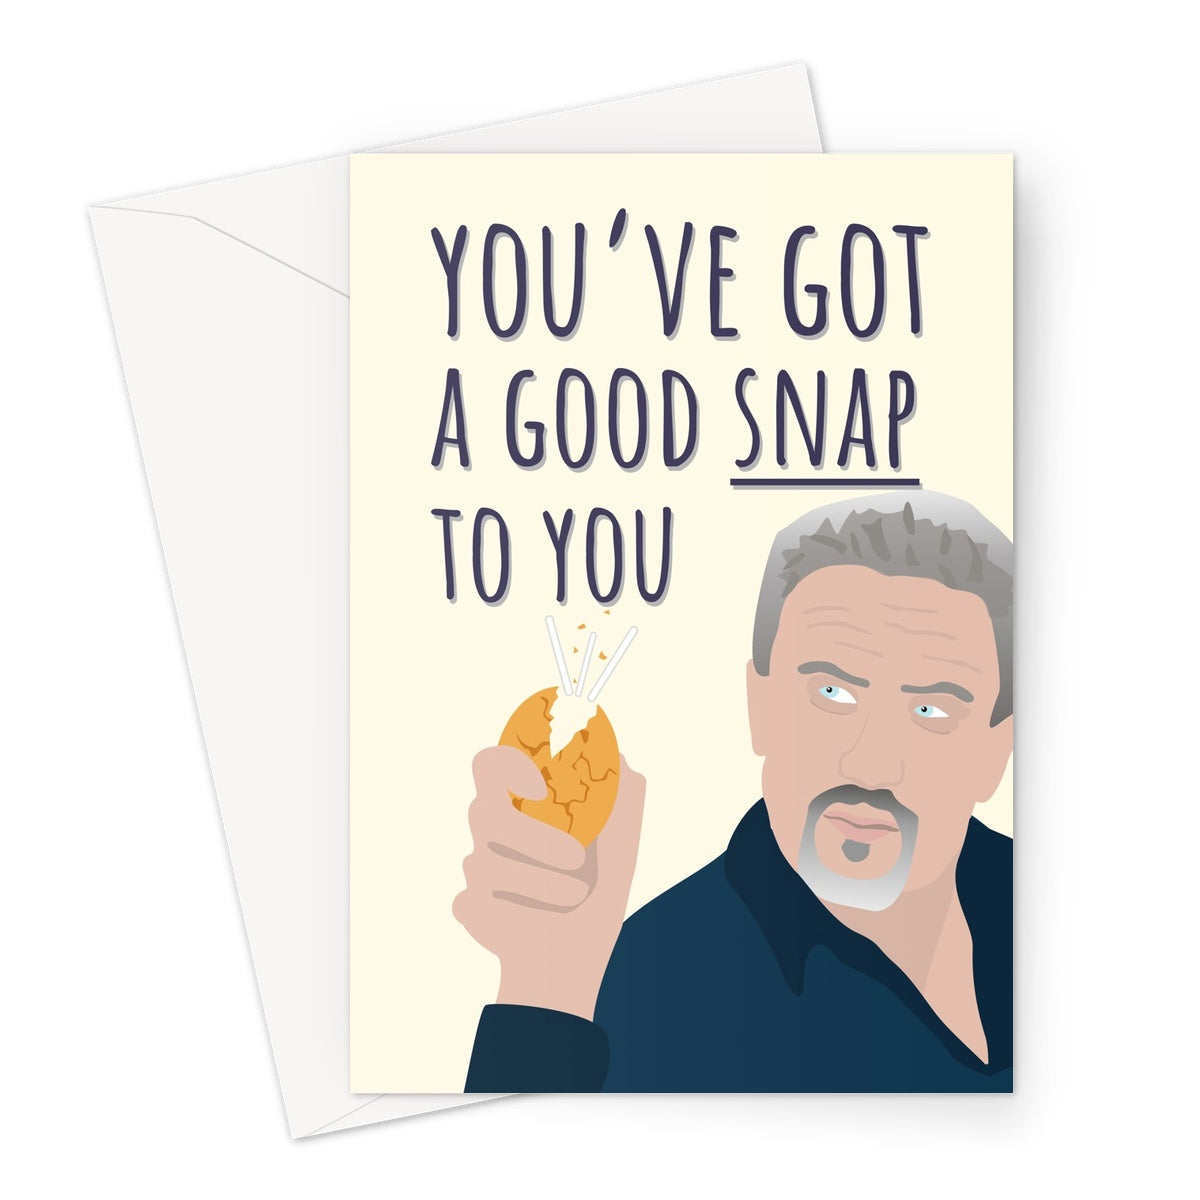 You've Got a Good Snap to You - Bake Off Paul Hollywood Fan Star Baker Funny Love Birthday Anniversary Biscuit Quote Tent TV Greeting Card